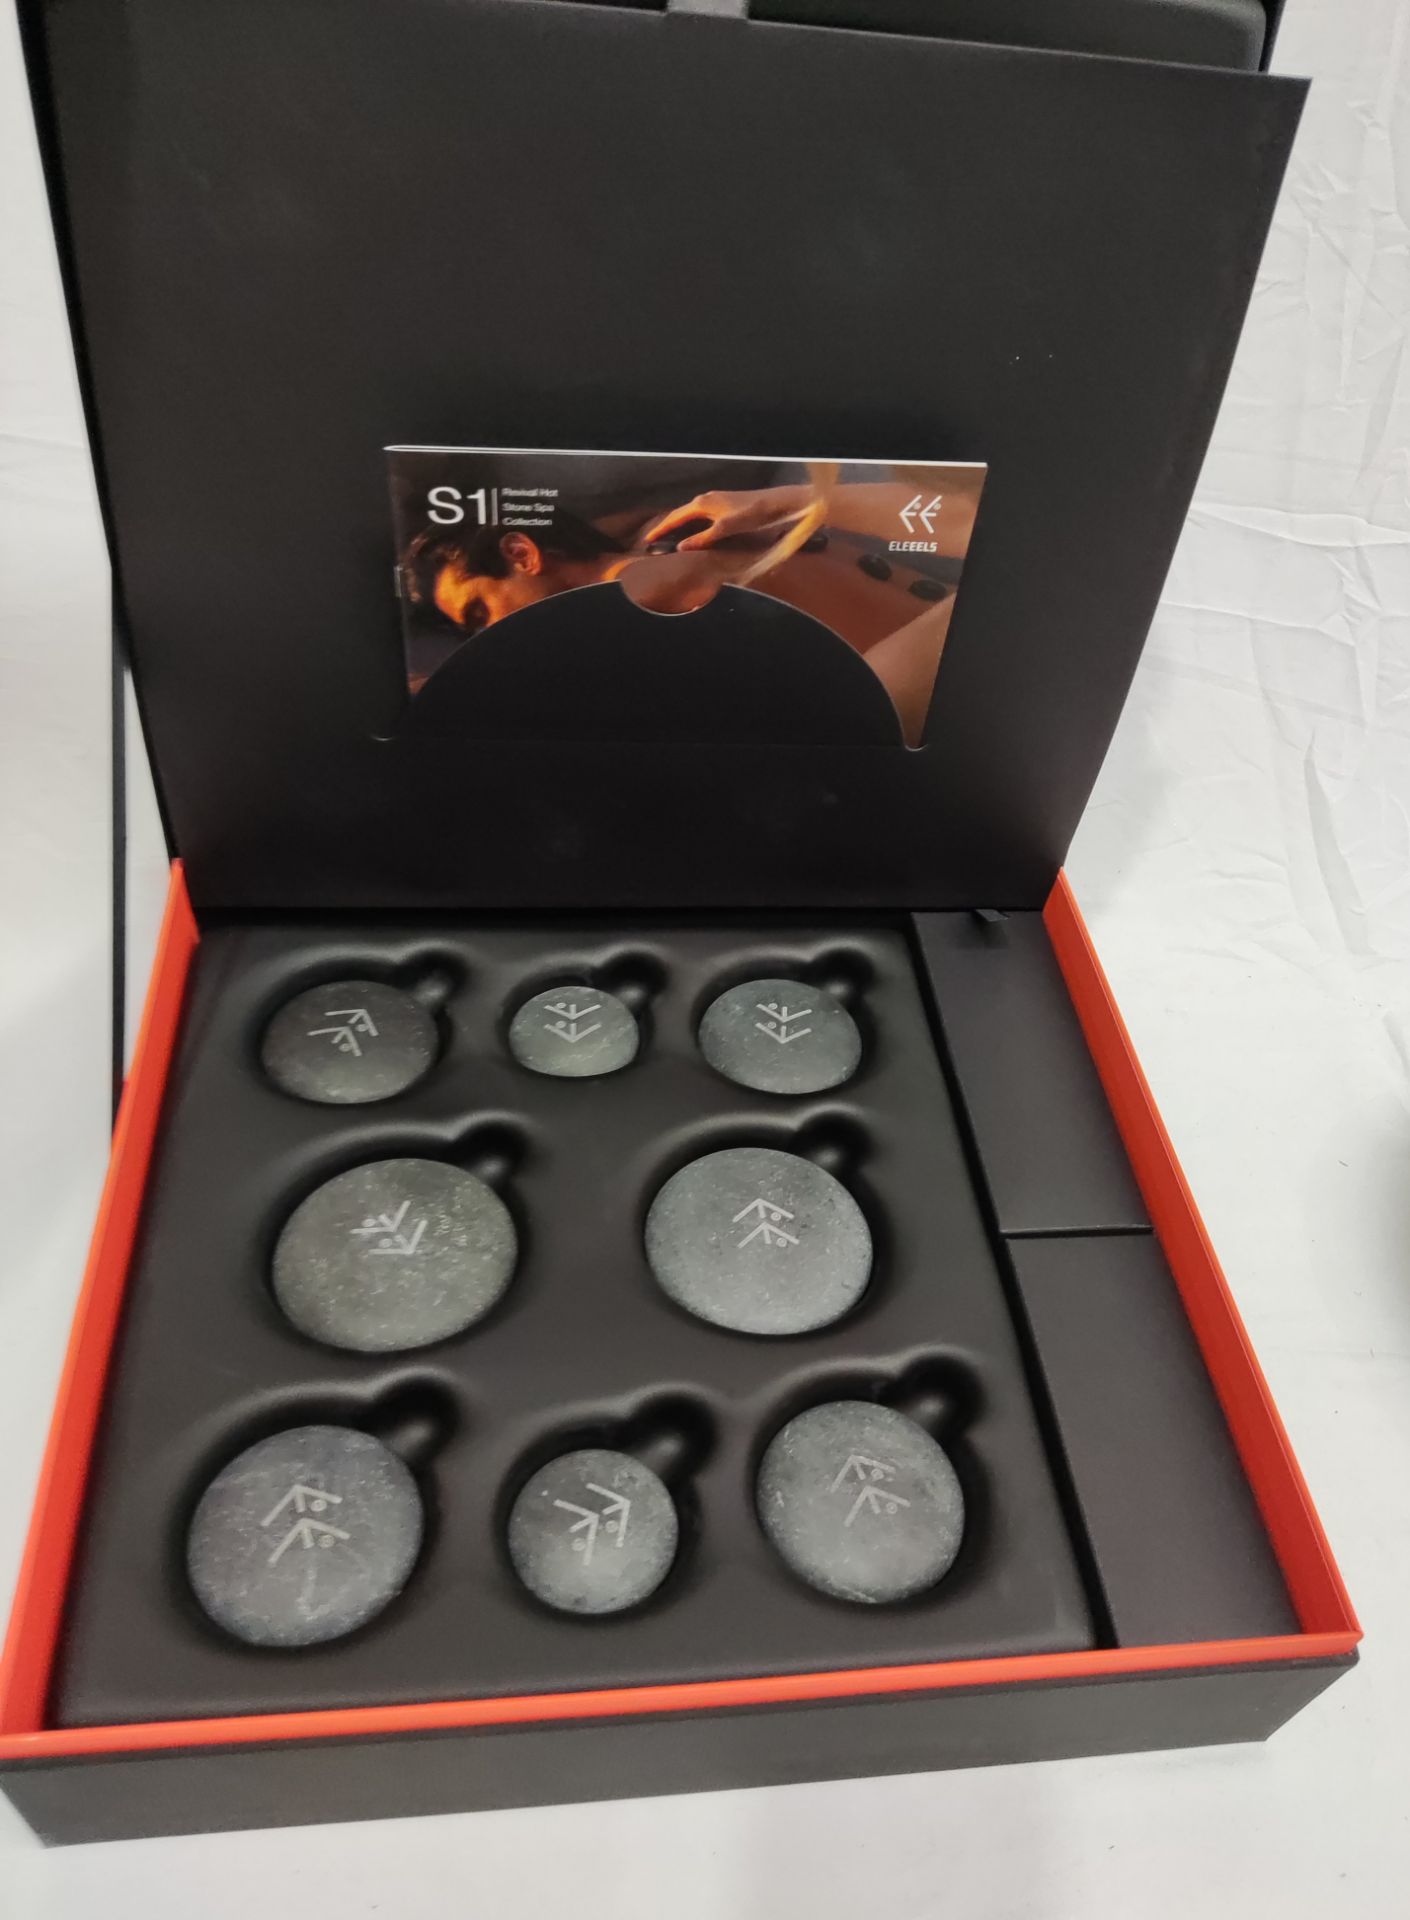 1 x ELEEELS Eleeels S1 Revival Hot Stone Spa Collection - New/Boxed - Original RRP £349 - Ref: - Image 15 of 16